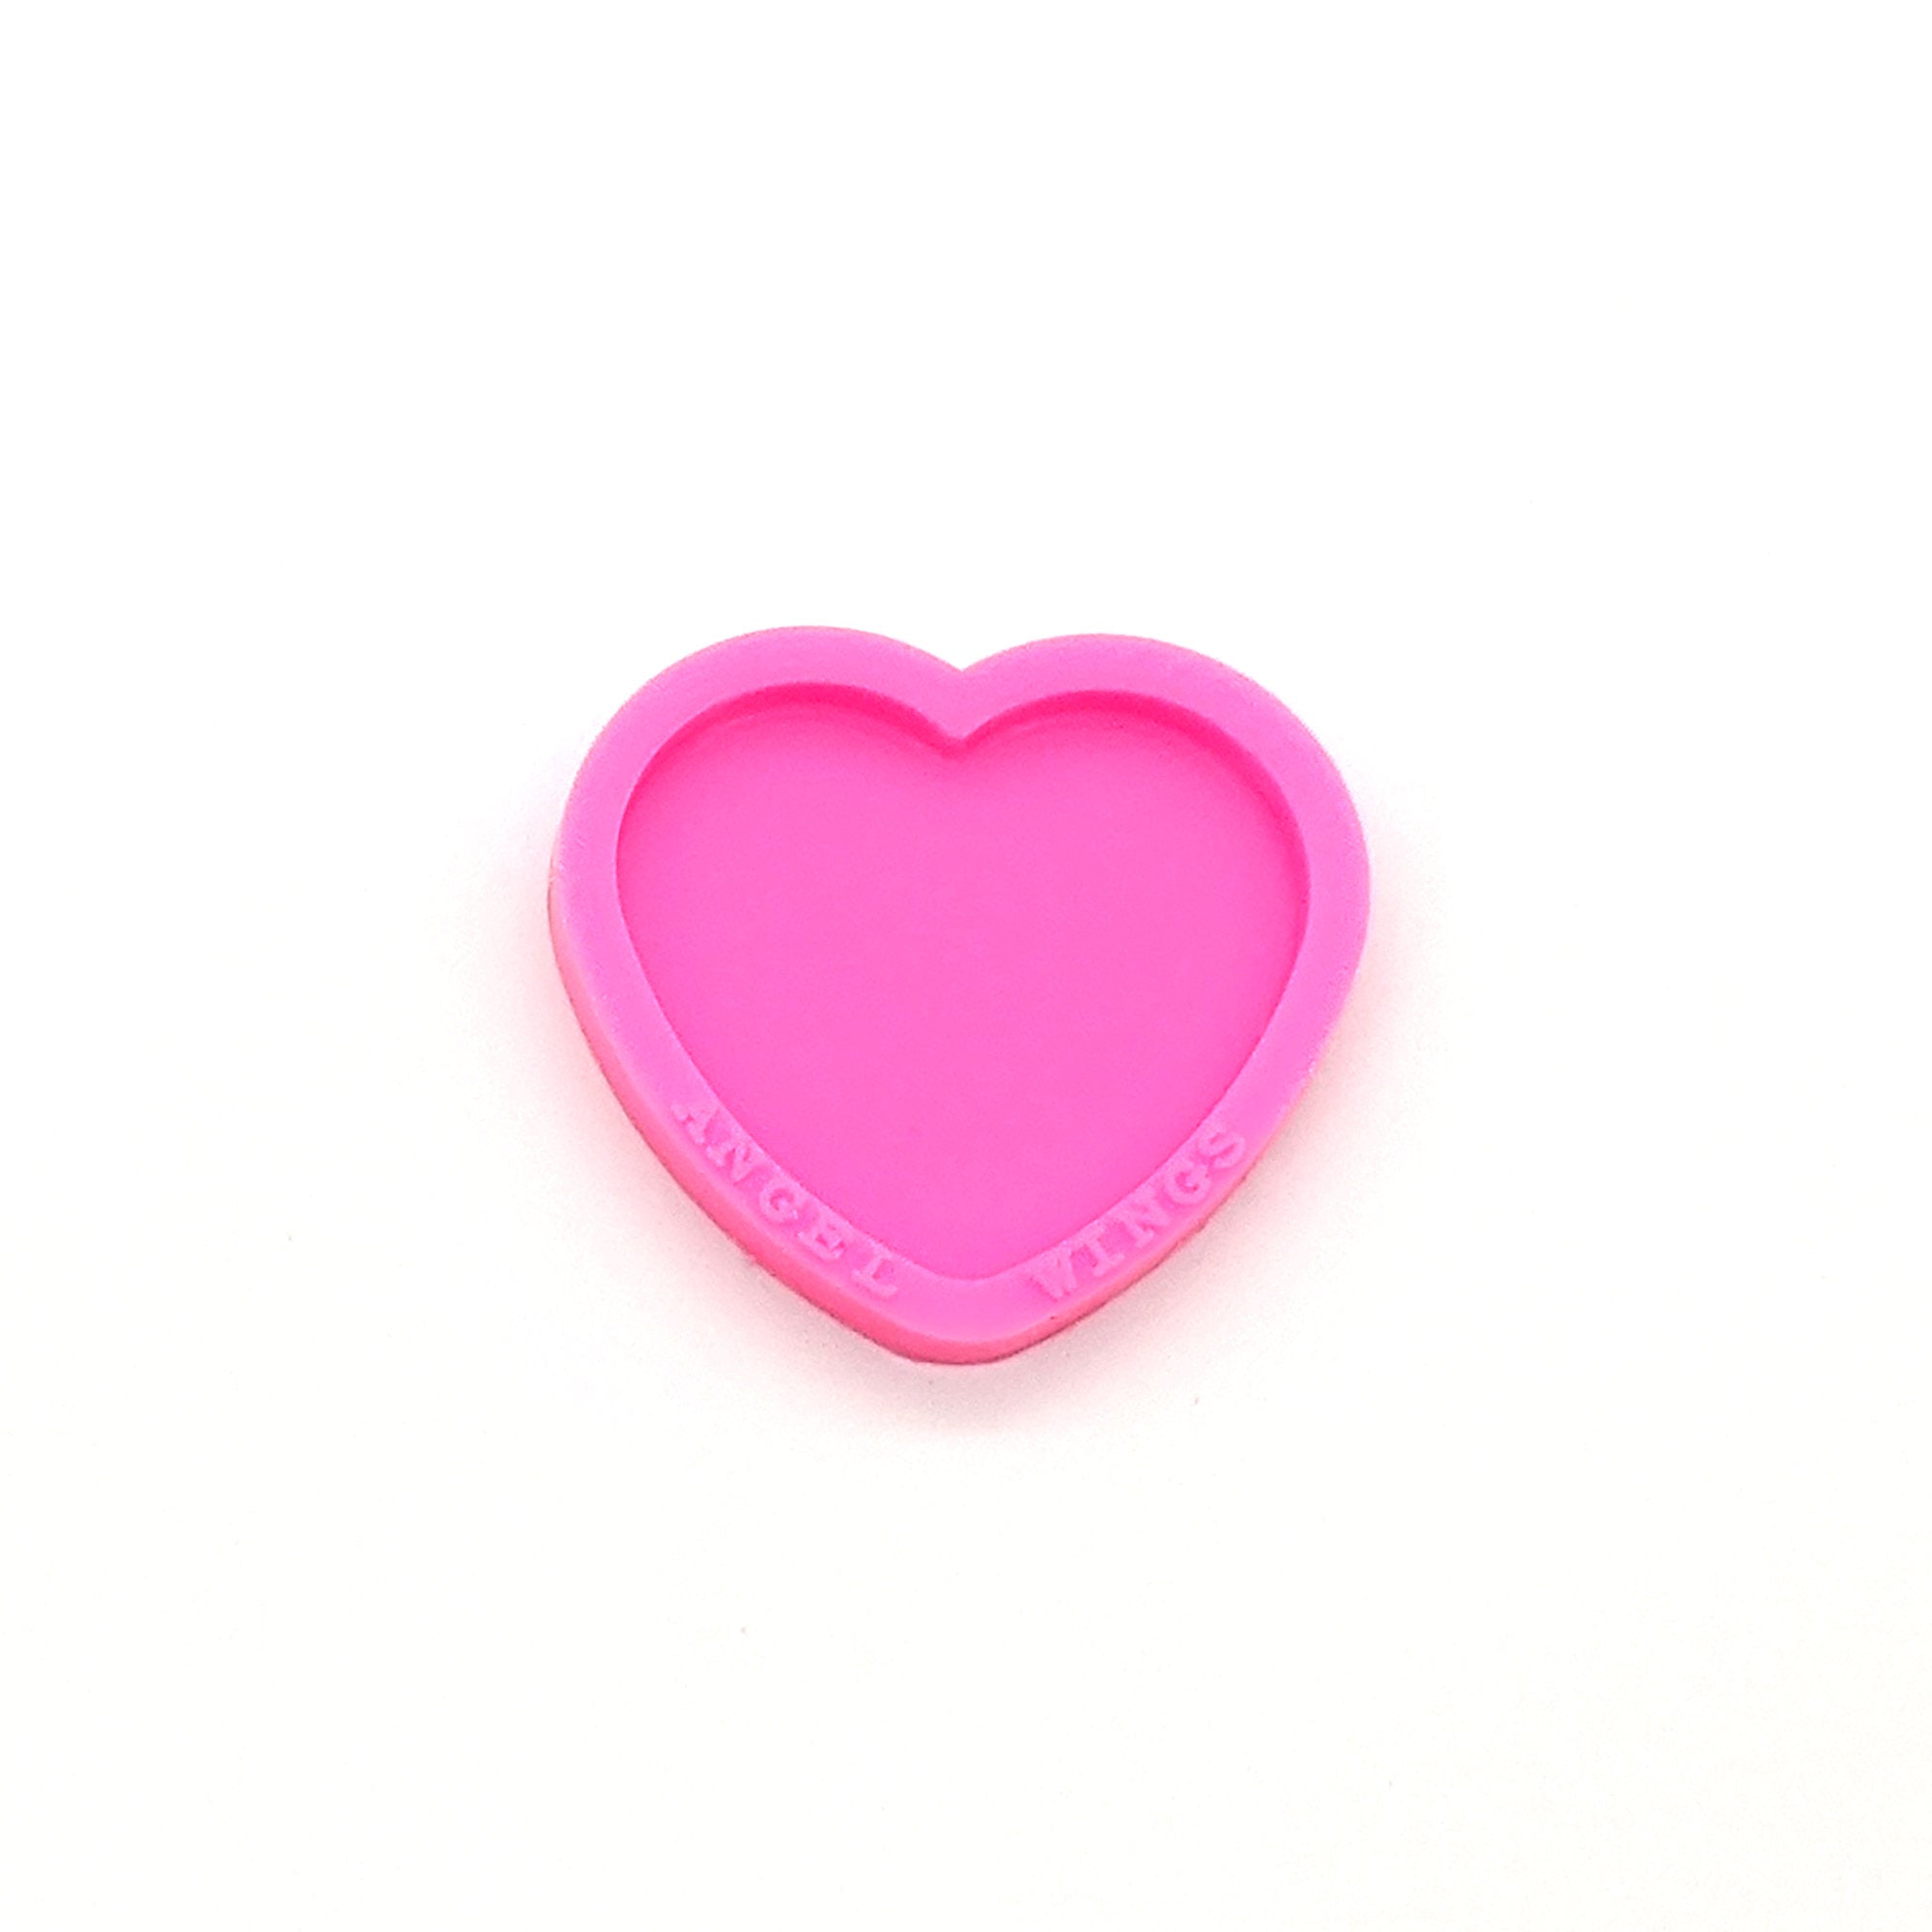 Heart Phone Grip Shiny Silicone Mold for Epoxy Resin for Custom Phone Grips - Keychain - Jewelry Making - Ornament Silicone Mold